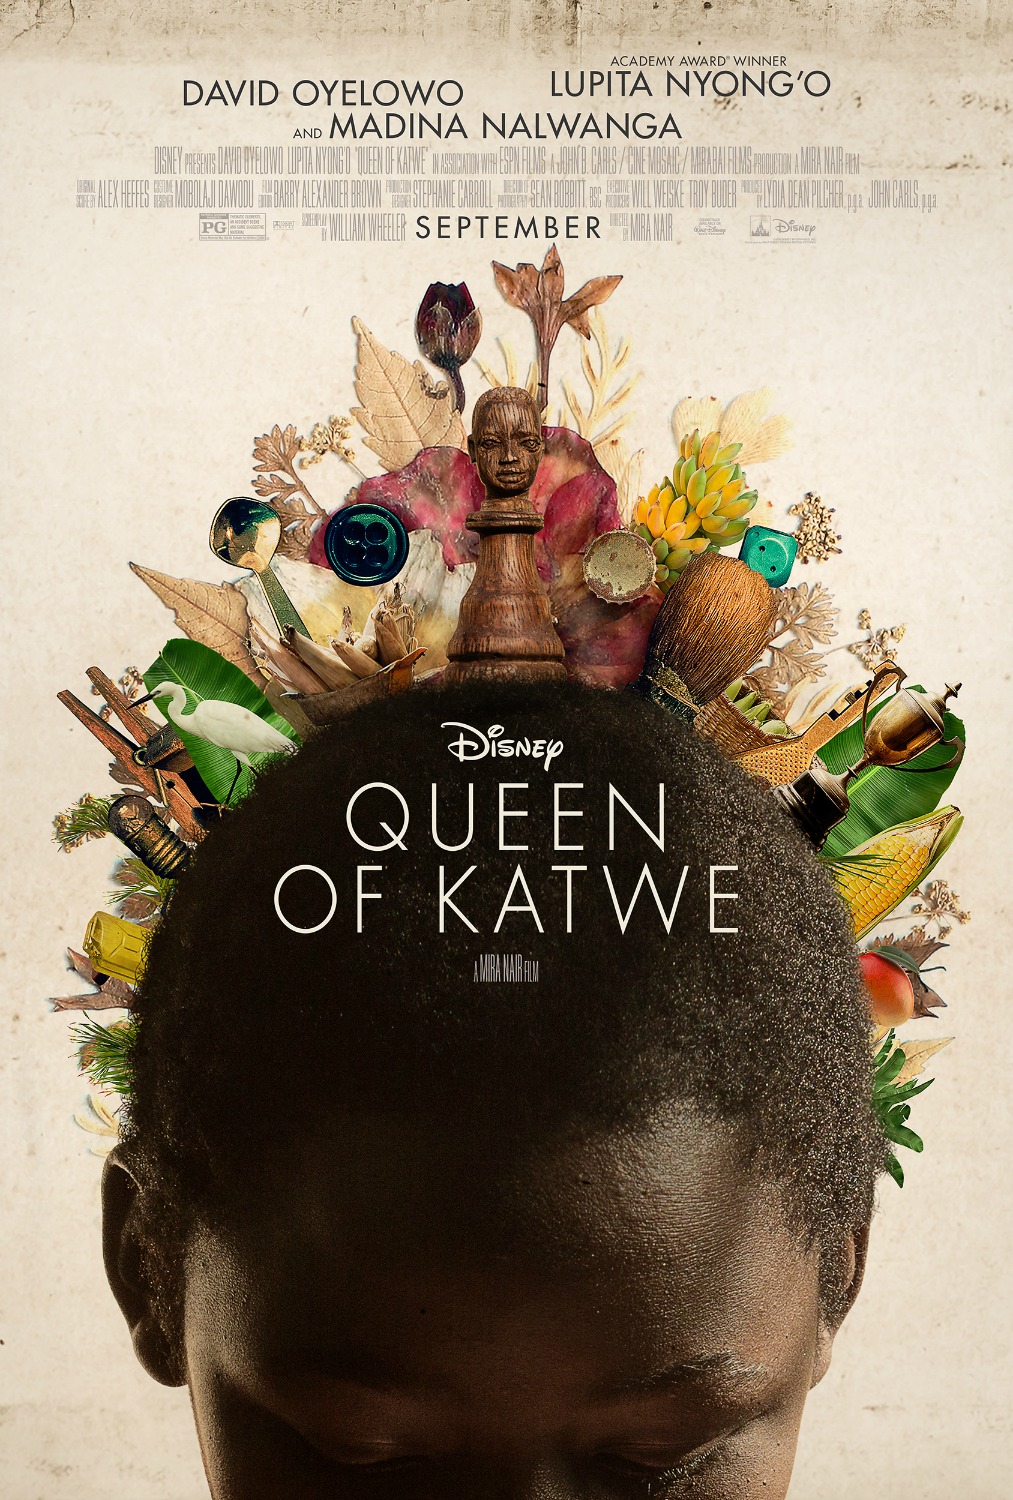 Disney's Queen of Katwe Trailer and Poster